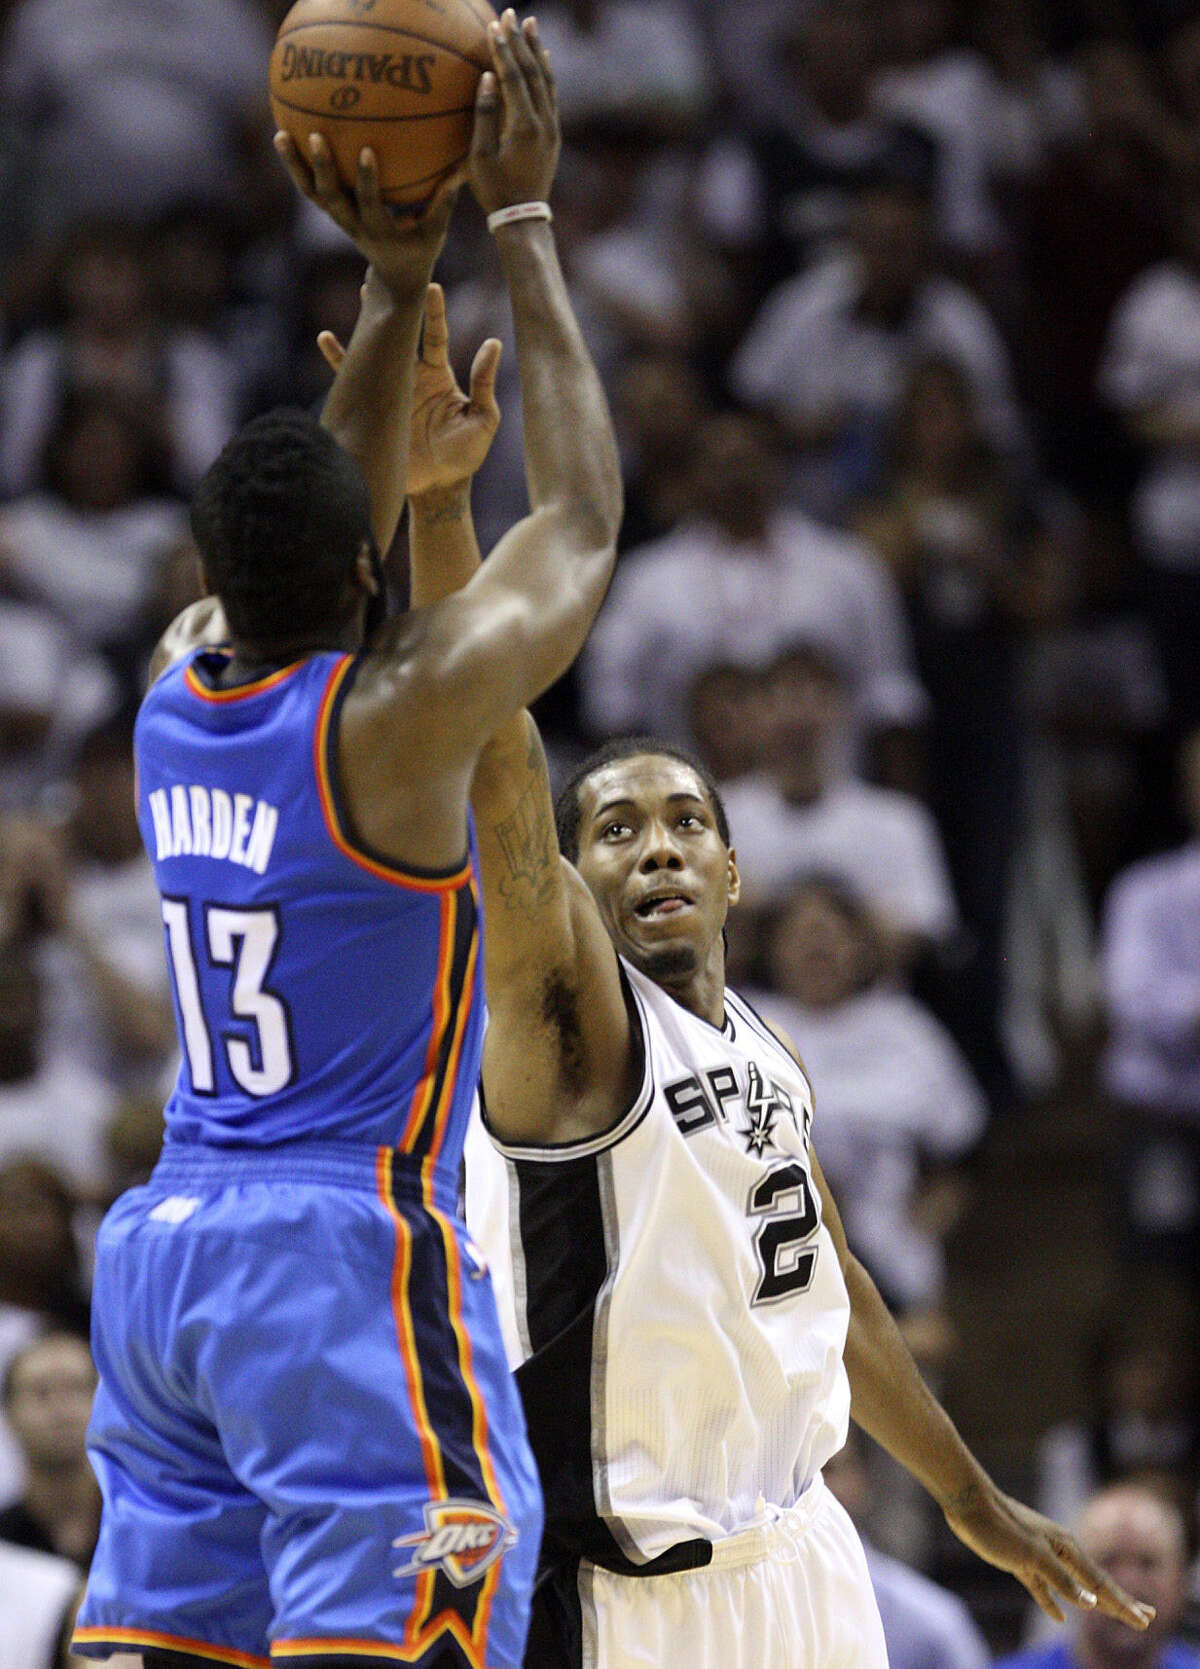 Kawhi Leonard (right) has moved on from the 2012 Western Conference finals in which James Harden provided a 3-point dagger for OKC in Game 5. Harden has also moved on — to Houston.